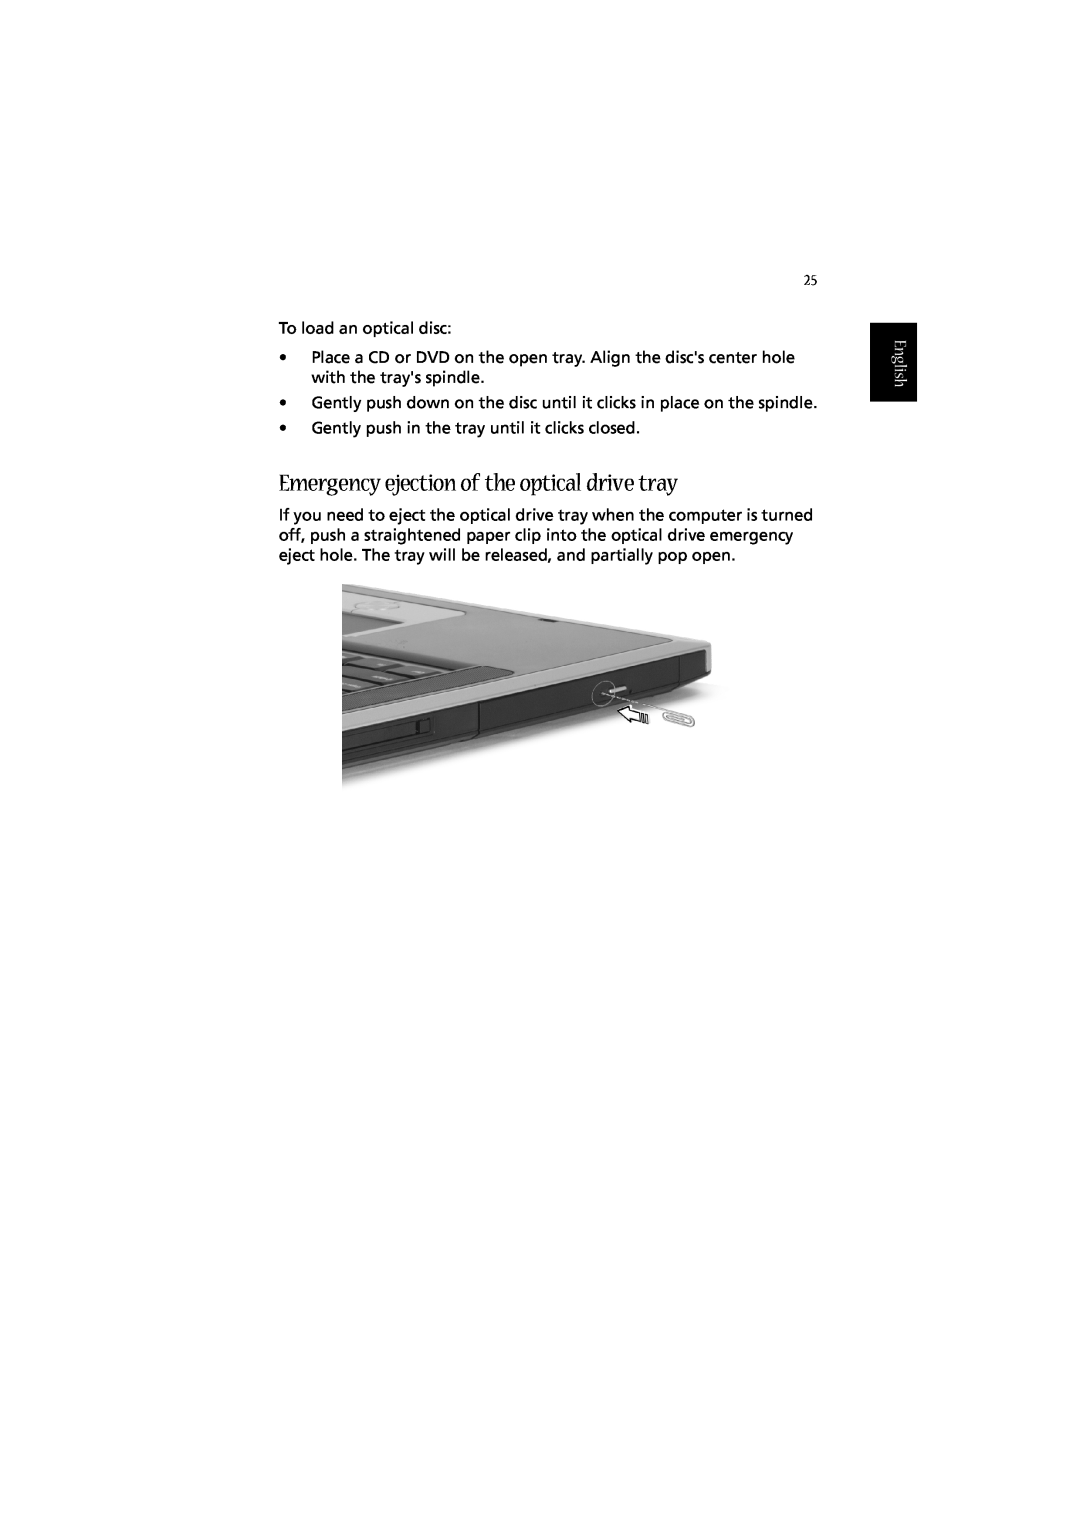 Acer 2010 manual Emergency ejection of the optical drive tray, English 